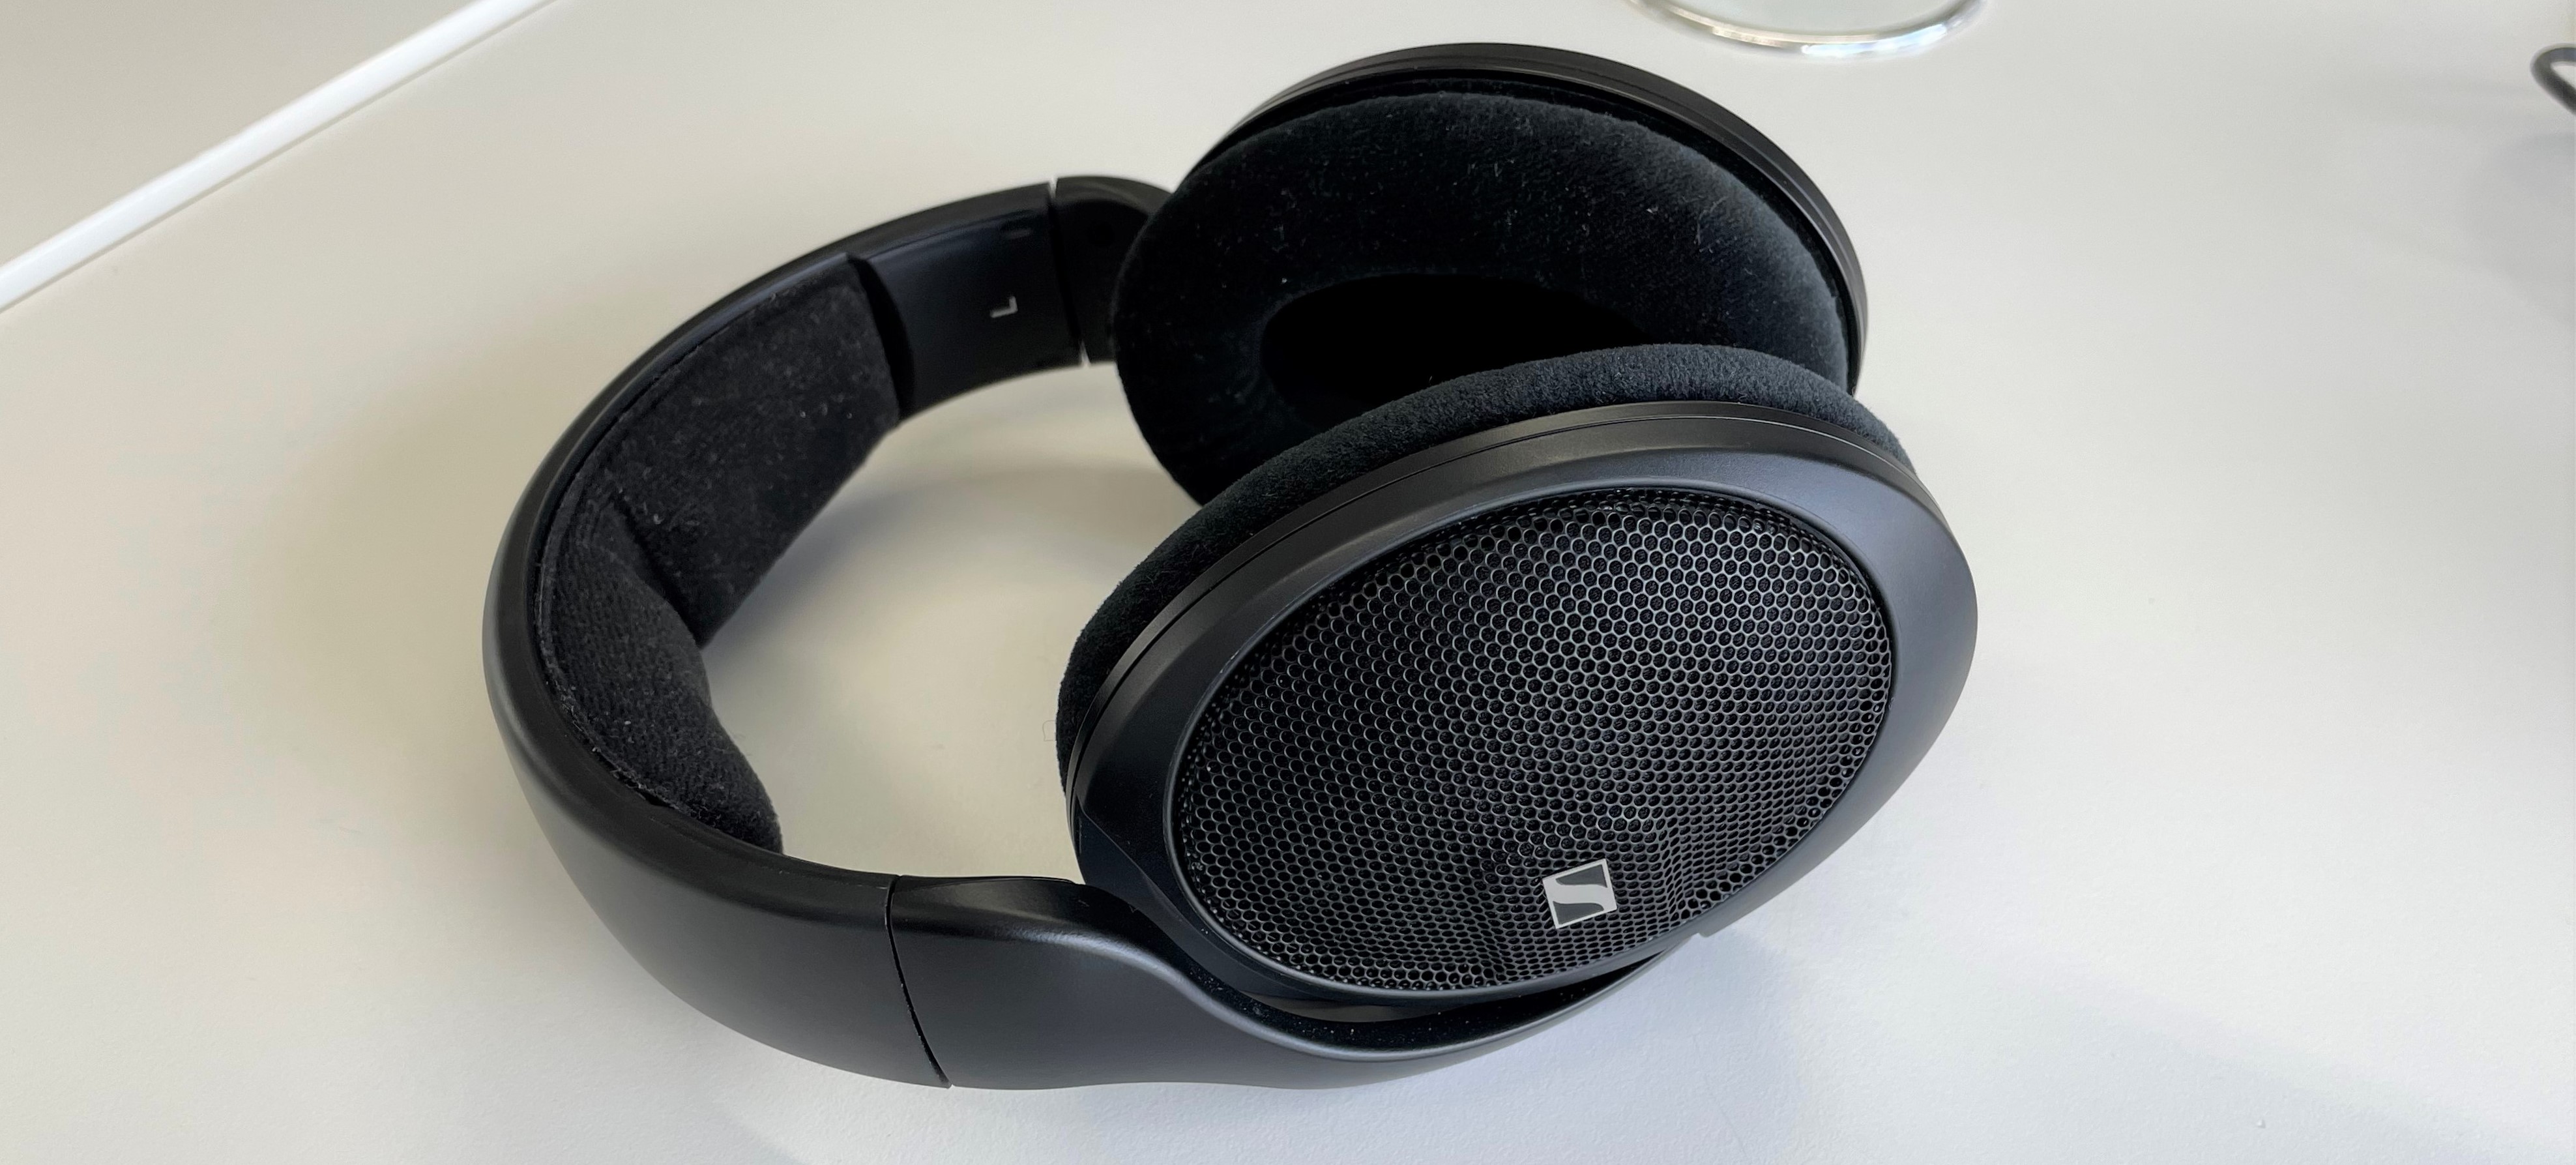 Sennheiser HD 560S review: Audiophile sound on a budget